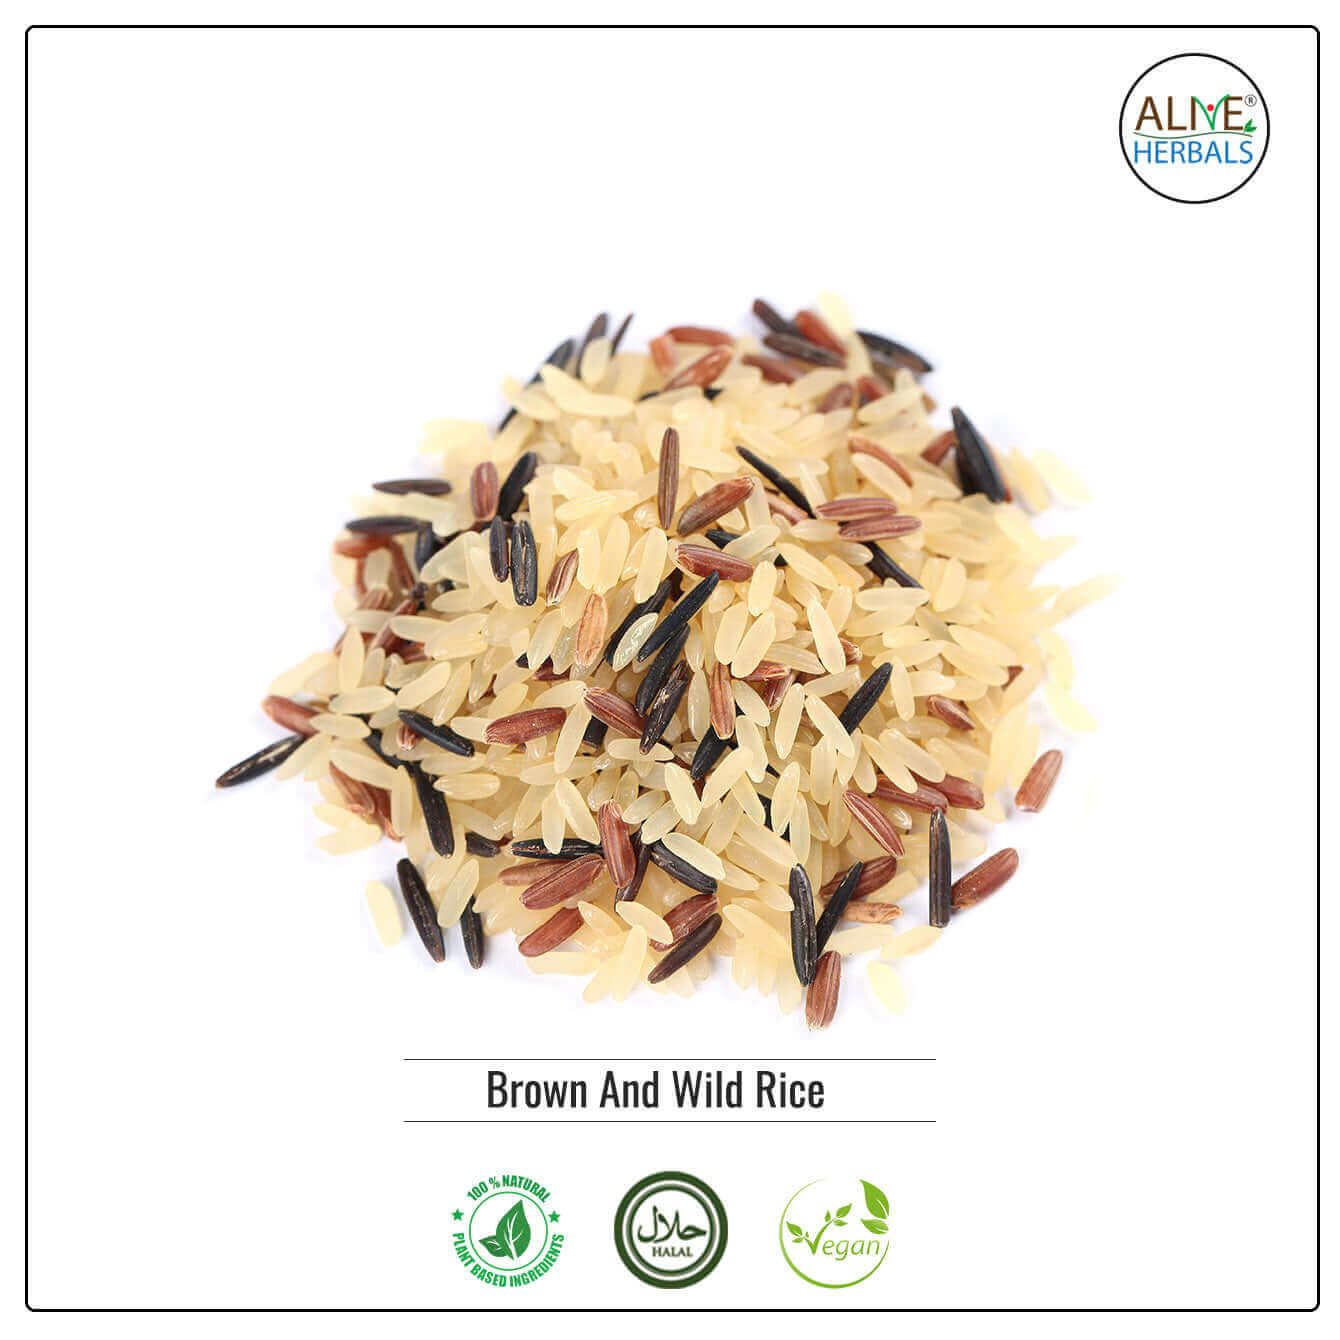 Brown And Wild Rice - Shop at Natural Food Store | Alive Herbals.